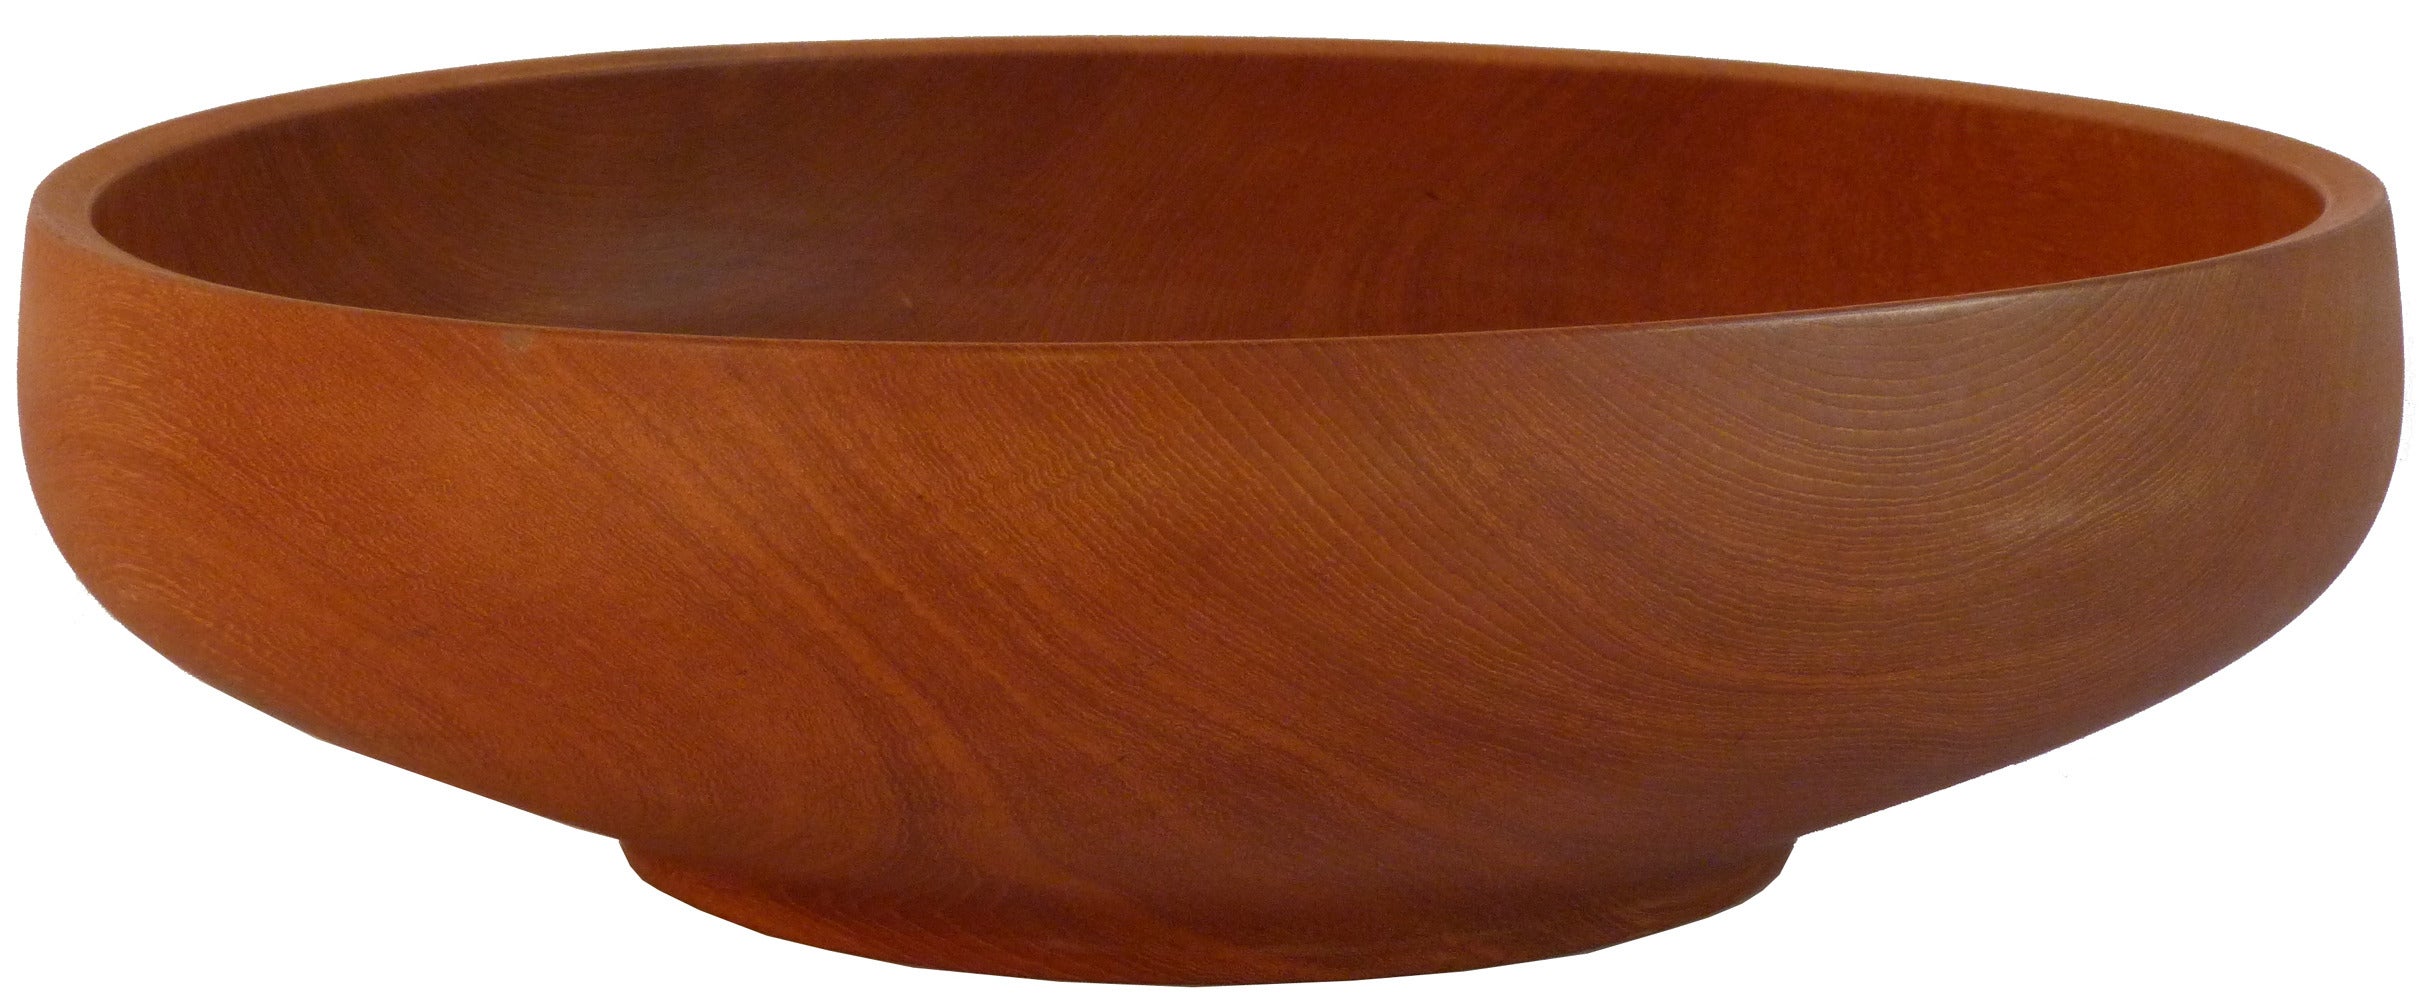 The Largest Bowl in Teak by Magne Monsen